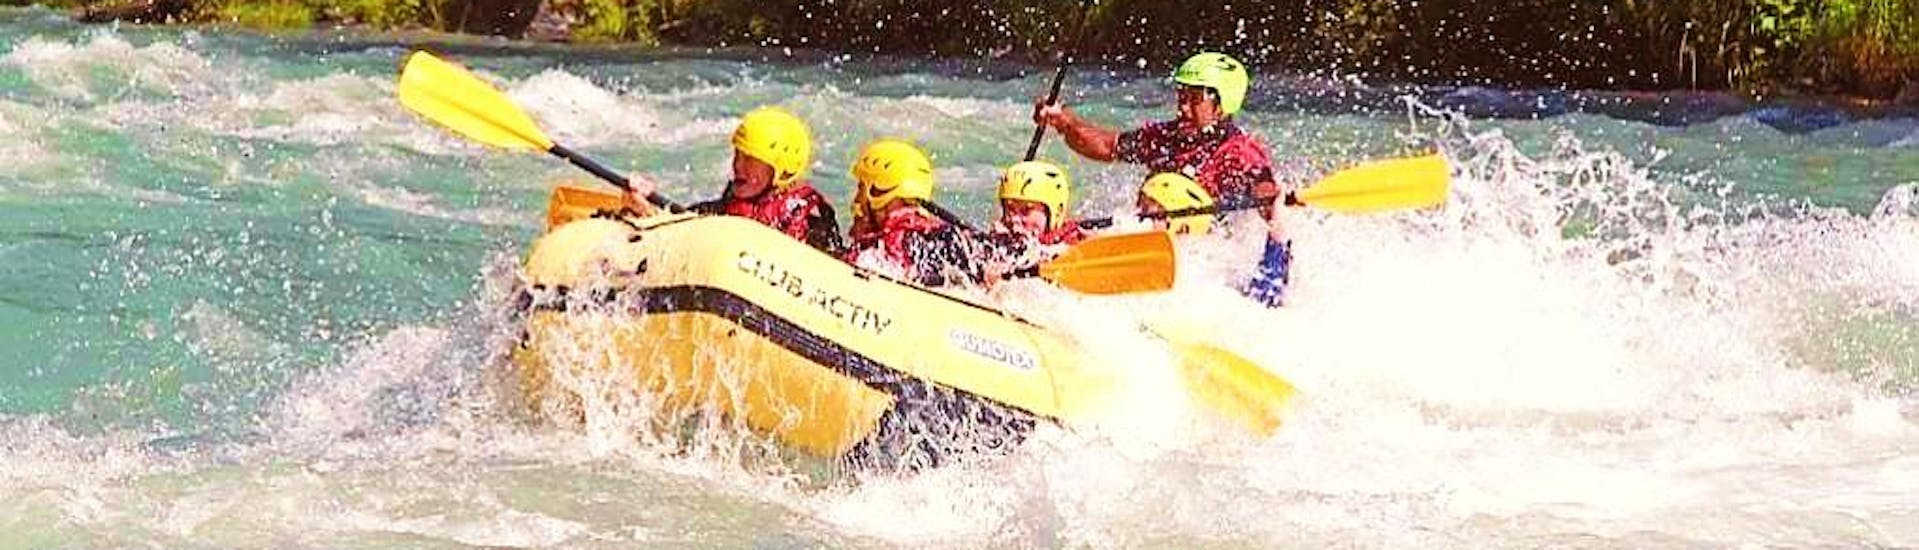 Rafting sul fiume Aurino a Campo Tures - Giro breve.